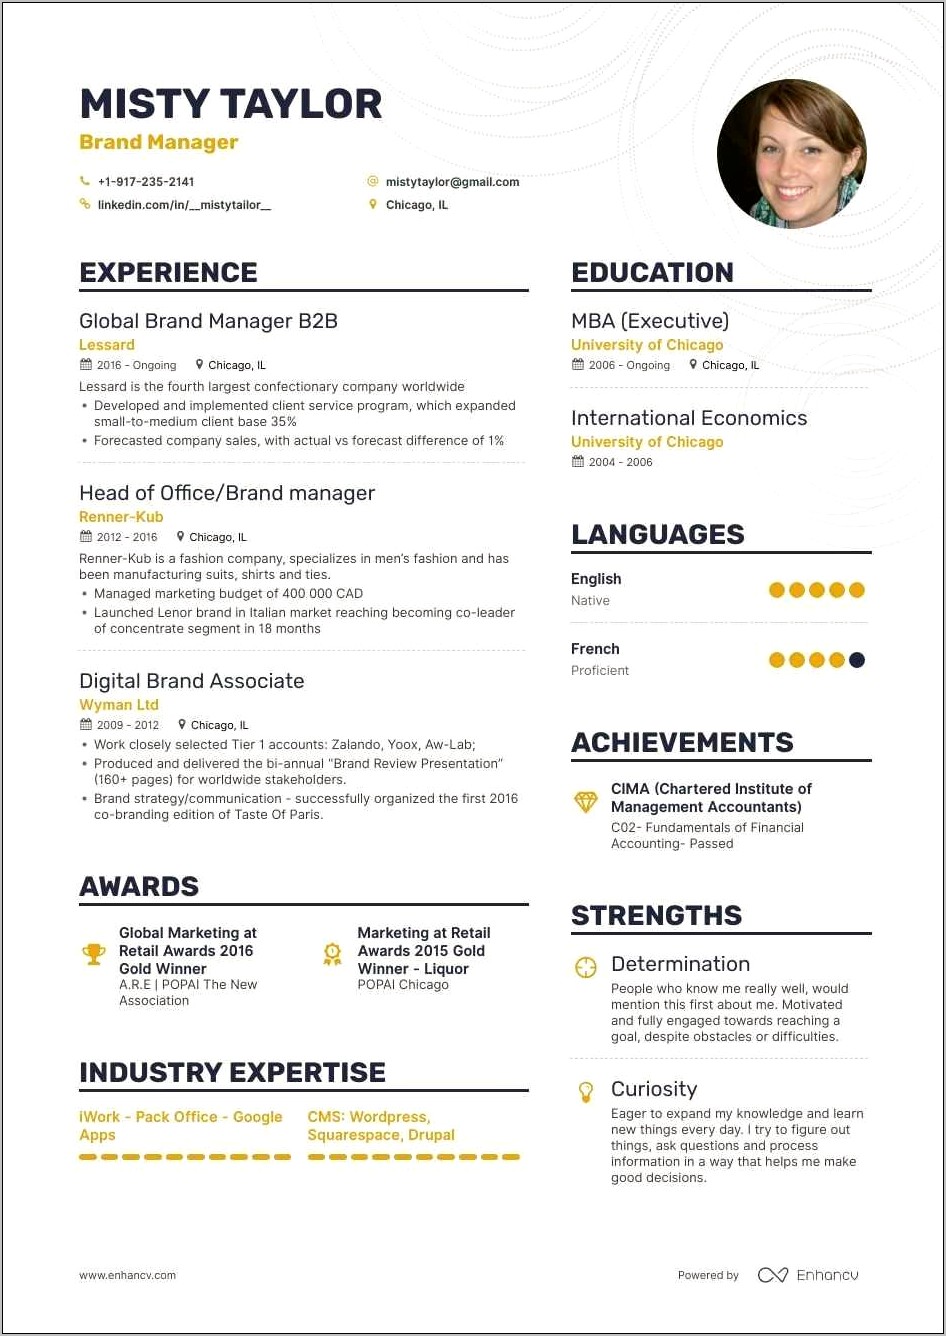 Ask A Manager Skills Based Resume